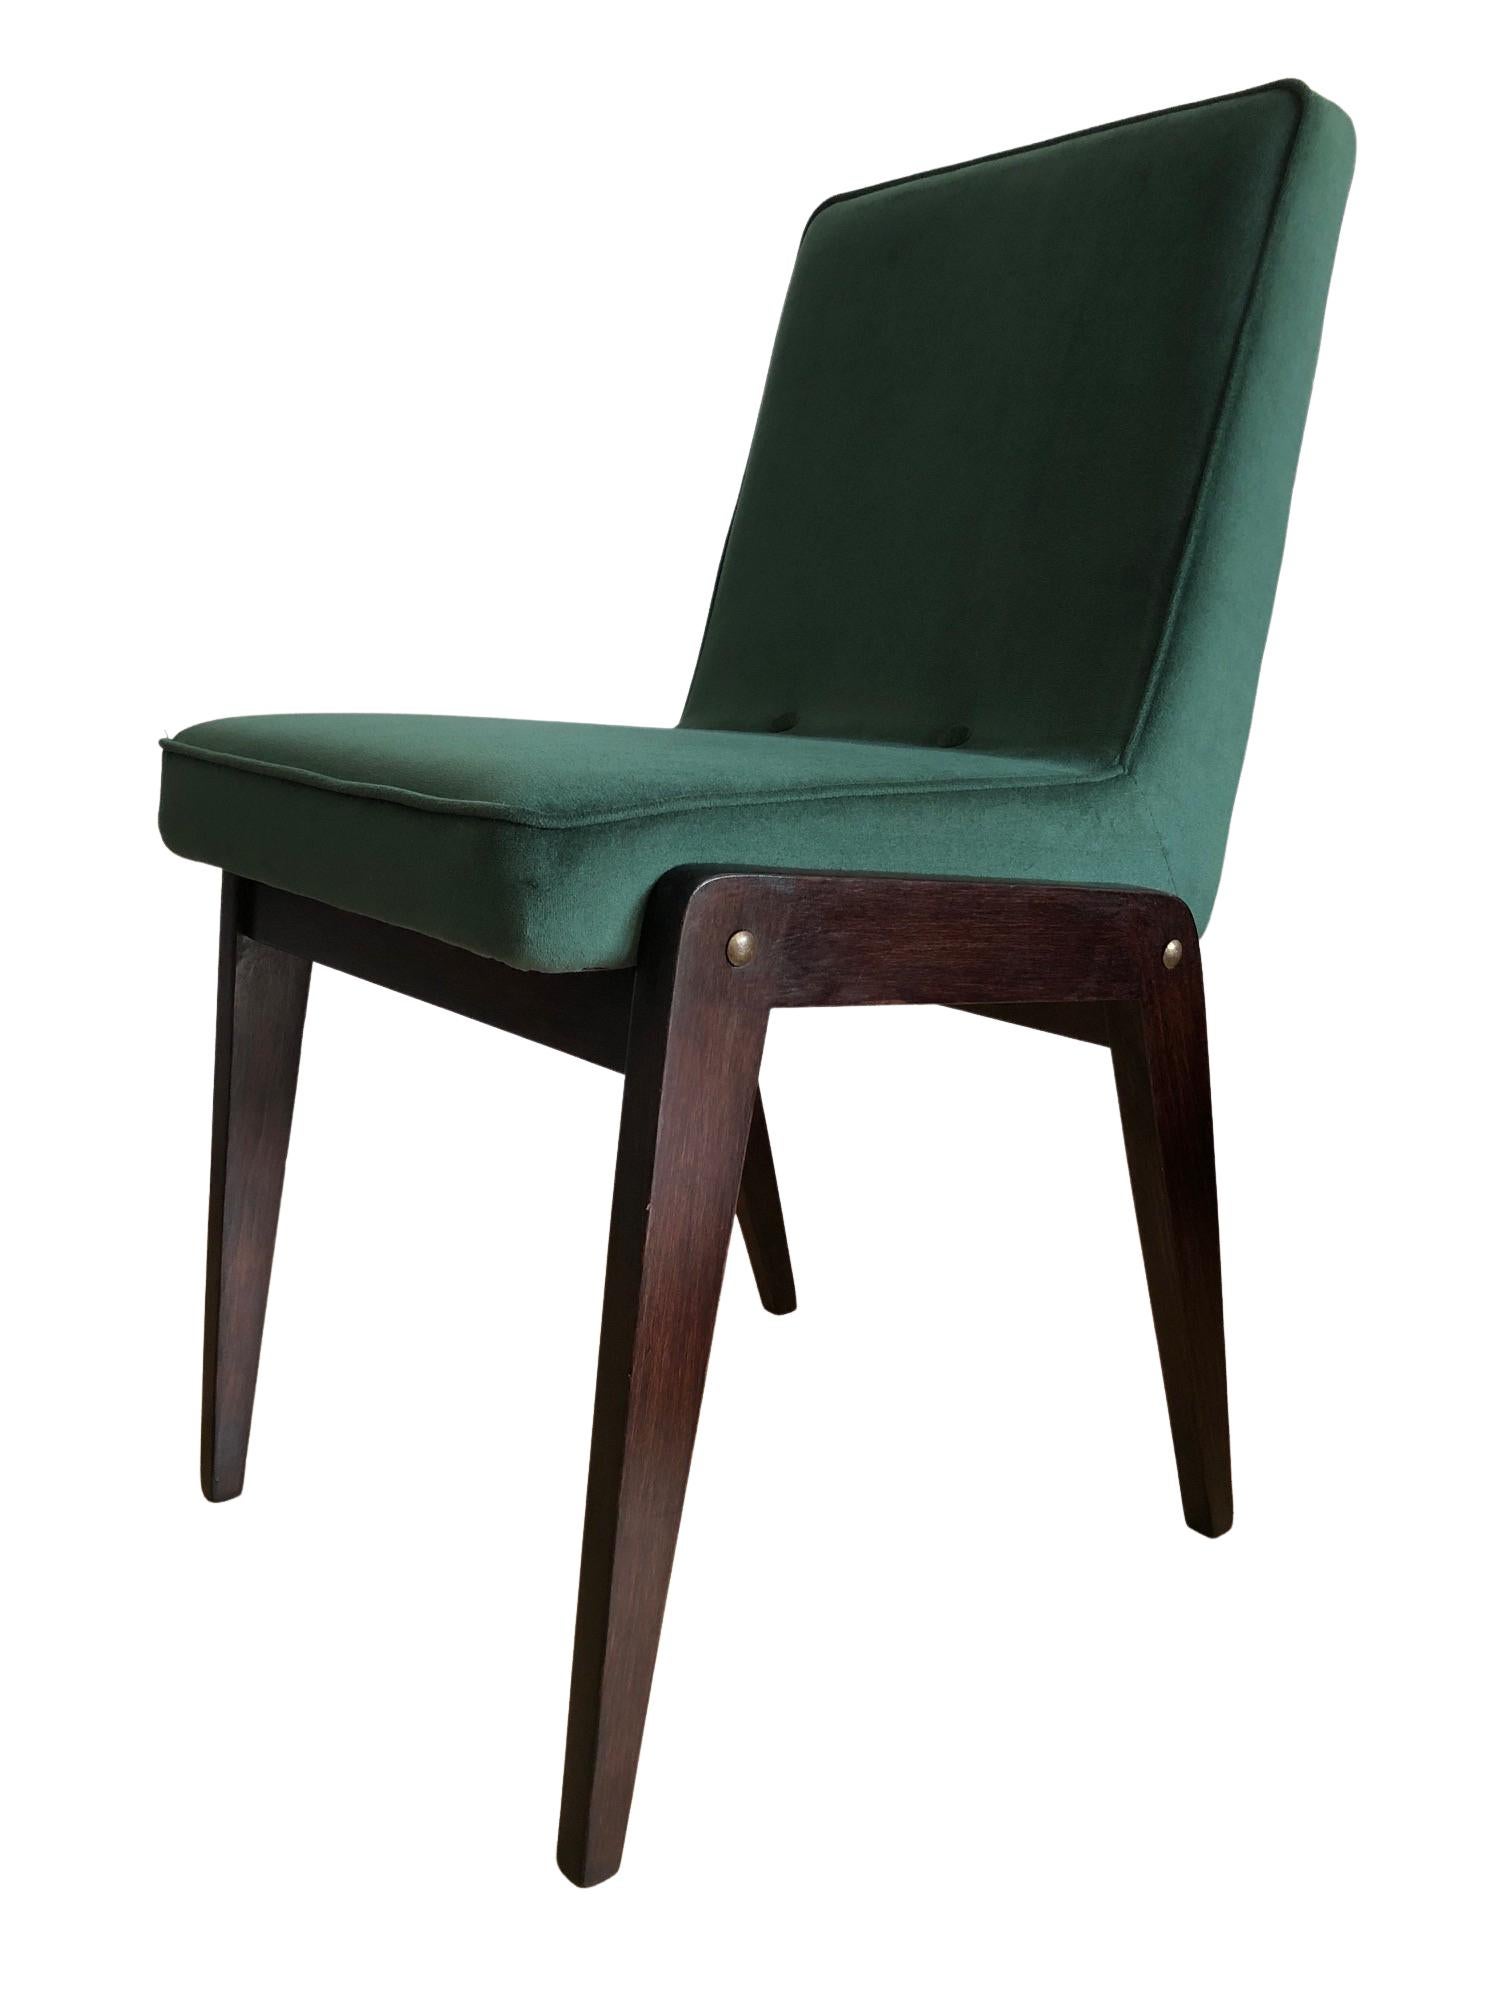 20th Century Mid-Century Chair by Chierowski, in Green Velvet, 1960s For Sale